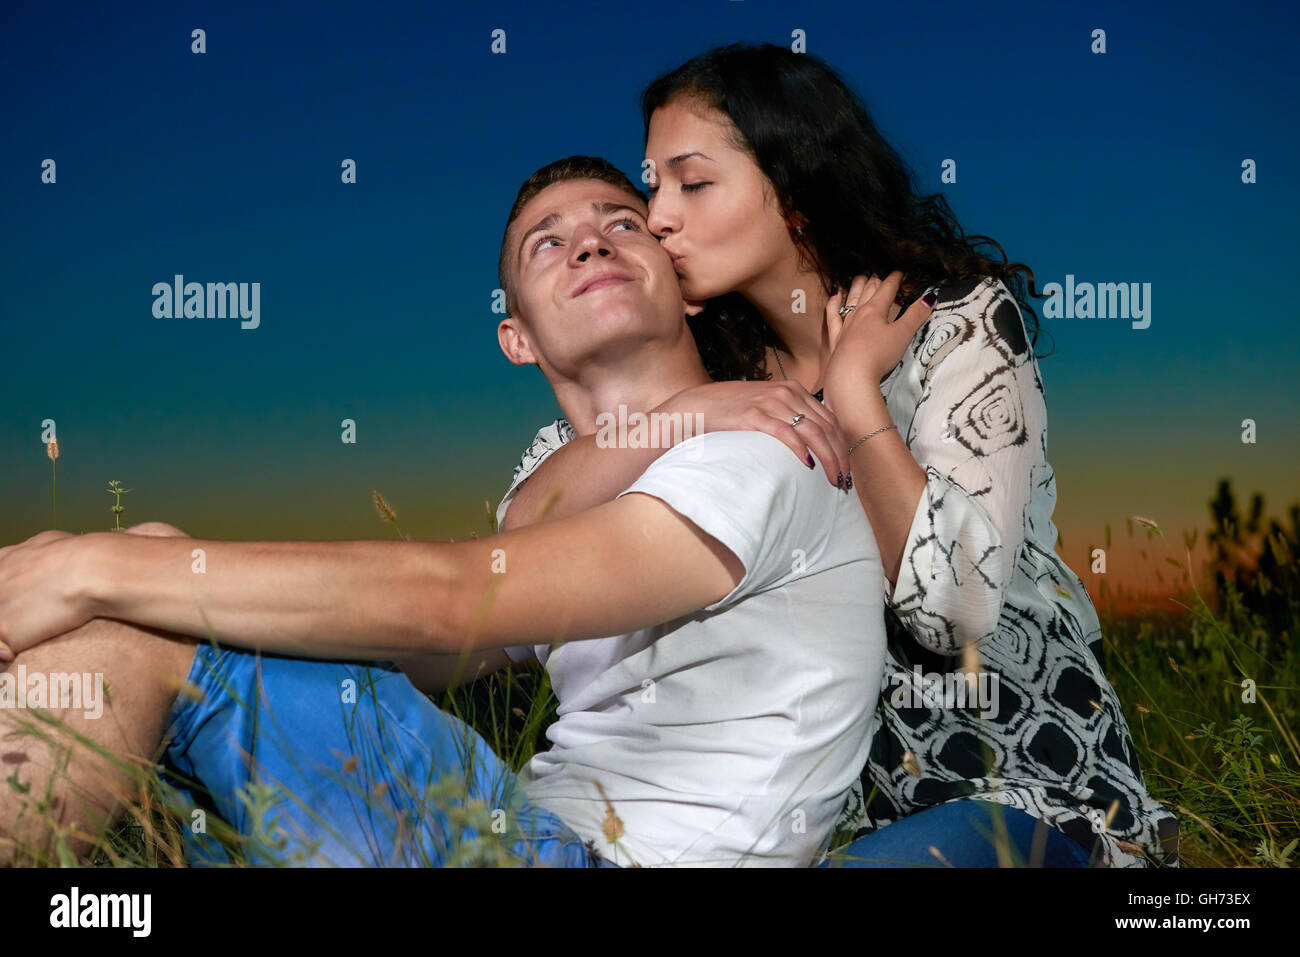 romantic couple kiss on grass and ebmbrace on country outdoor, dark night sky, love concept, young adult people Stock Photo